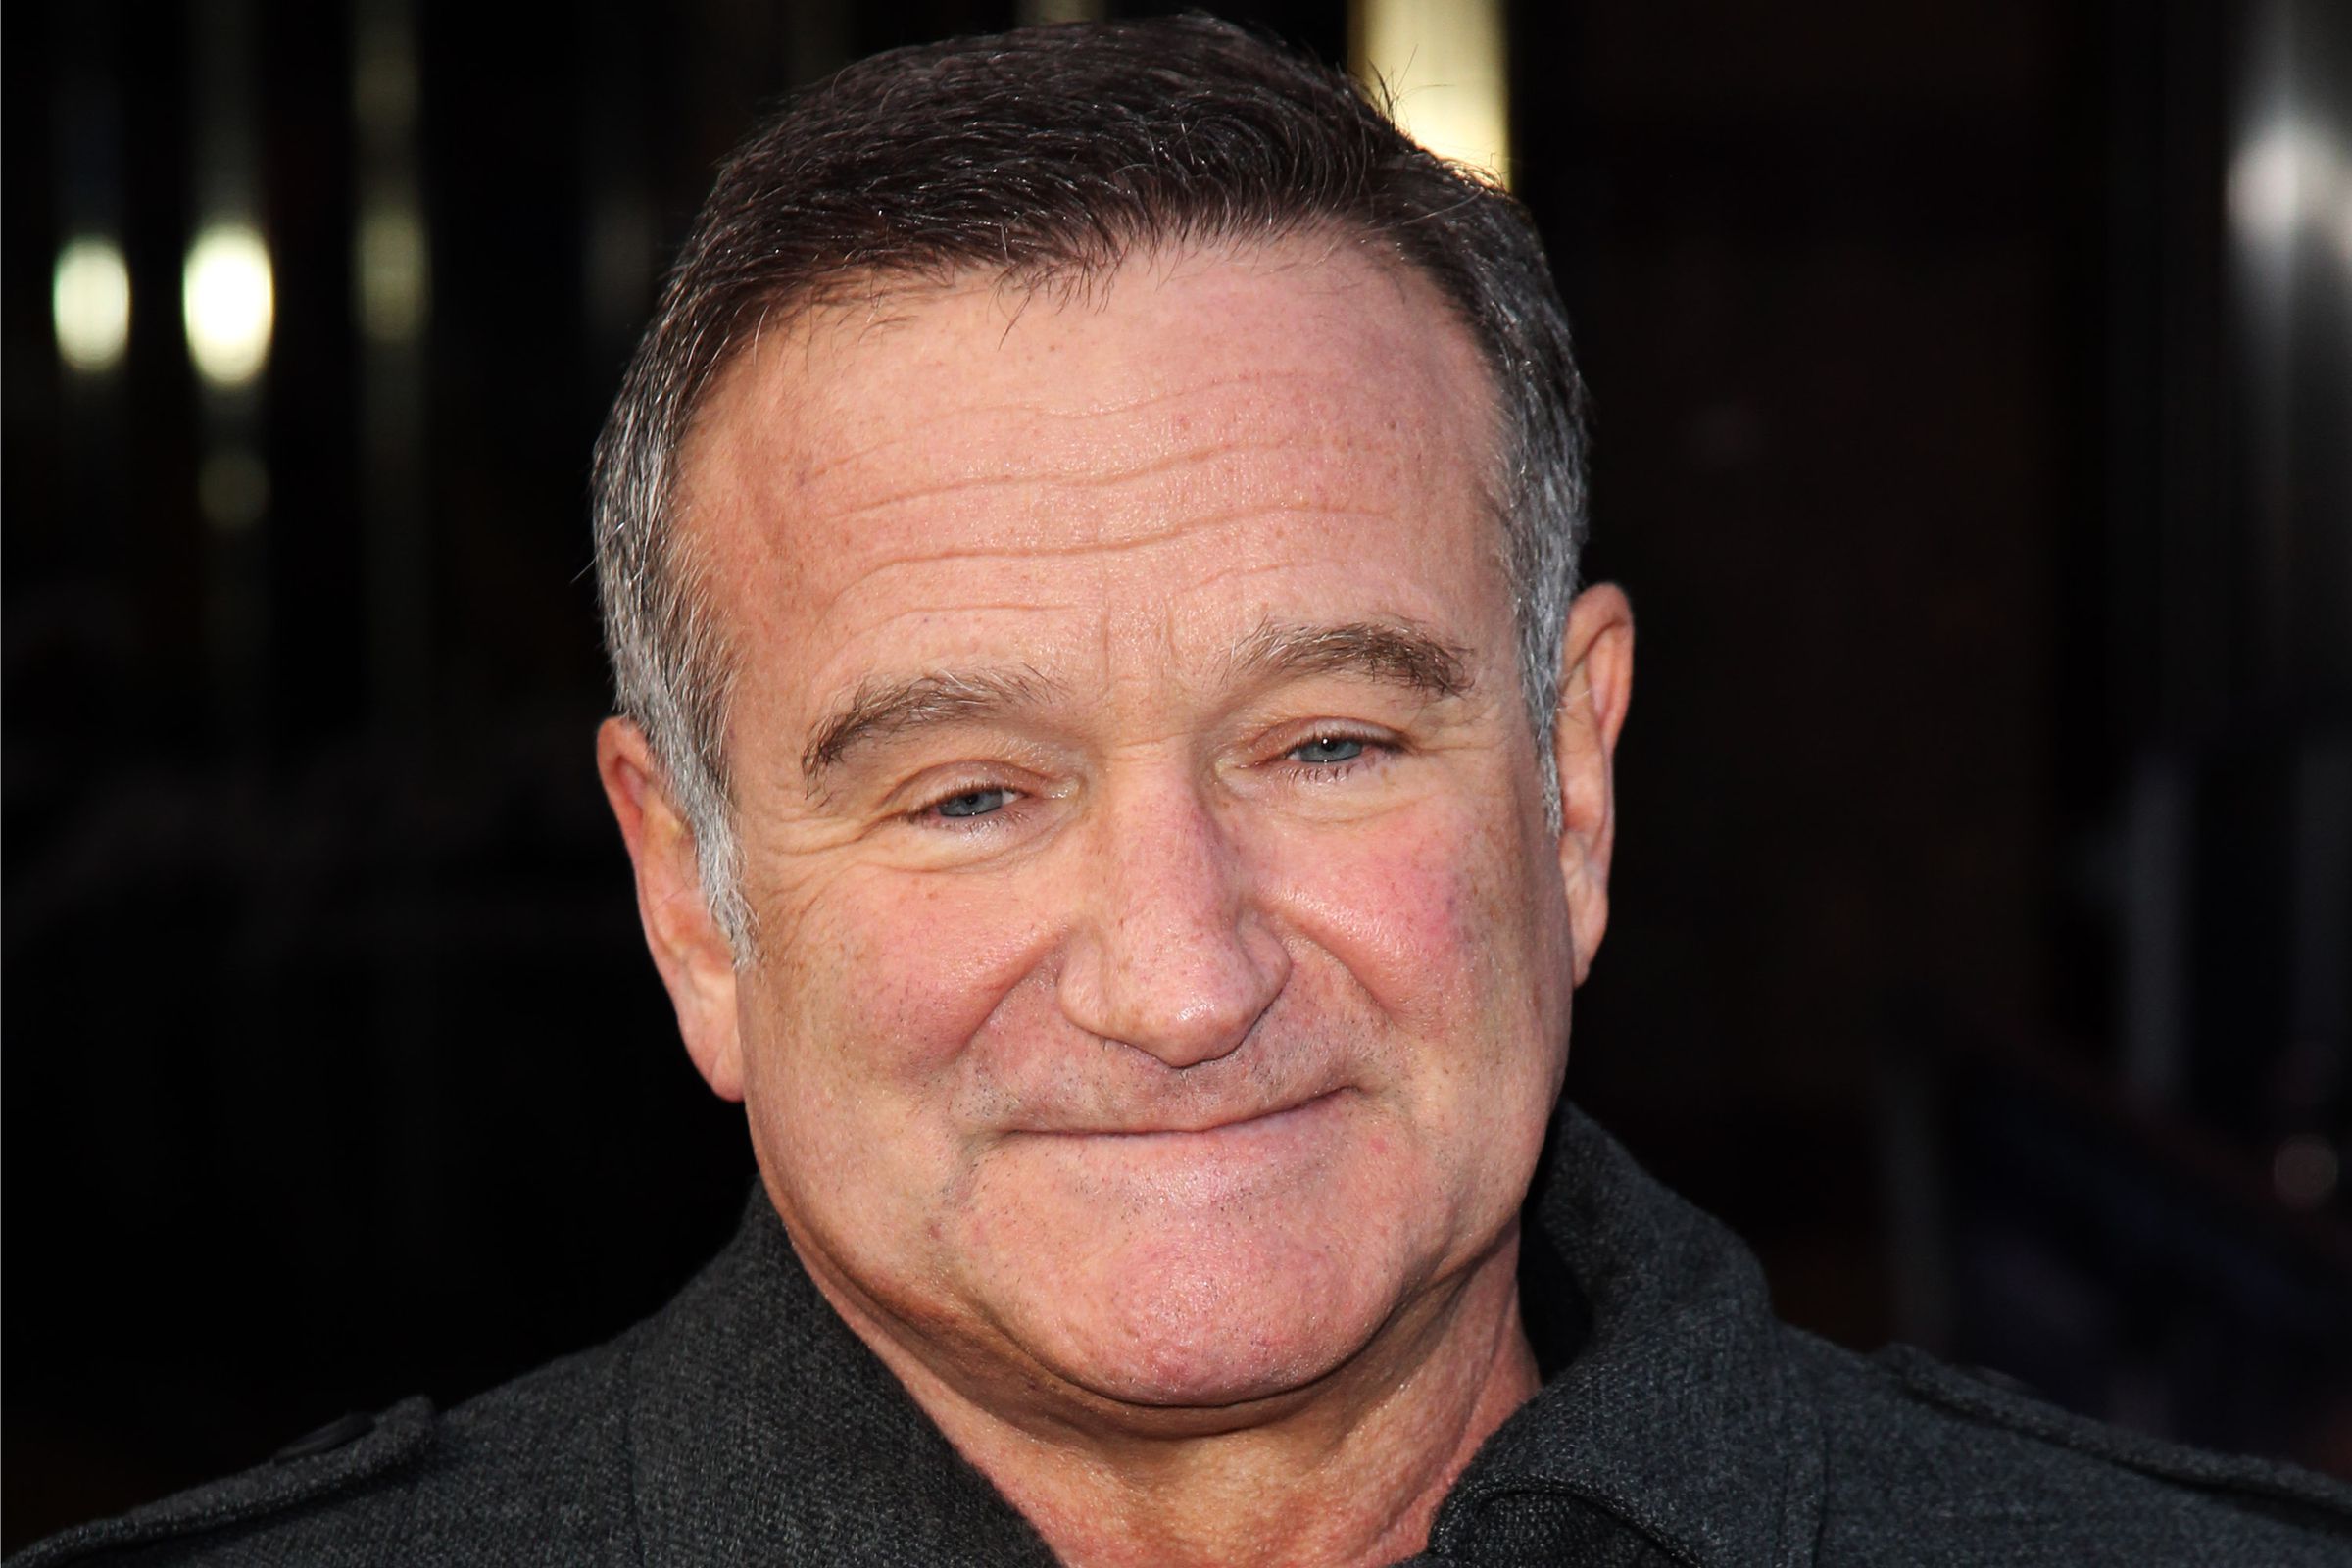 Robin Williams at the European premiere of Happy Feet Two in 2011 in London.